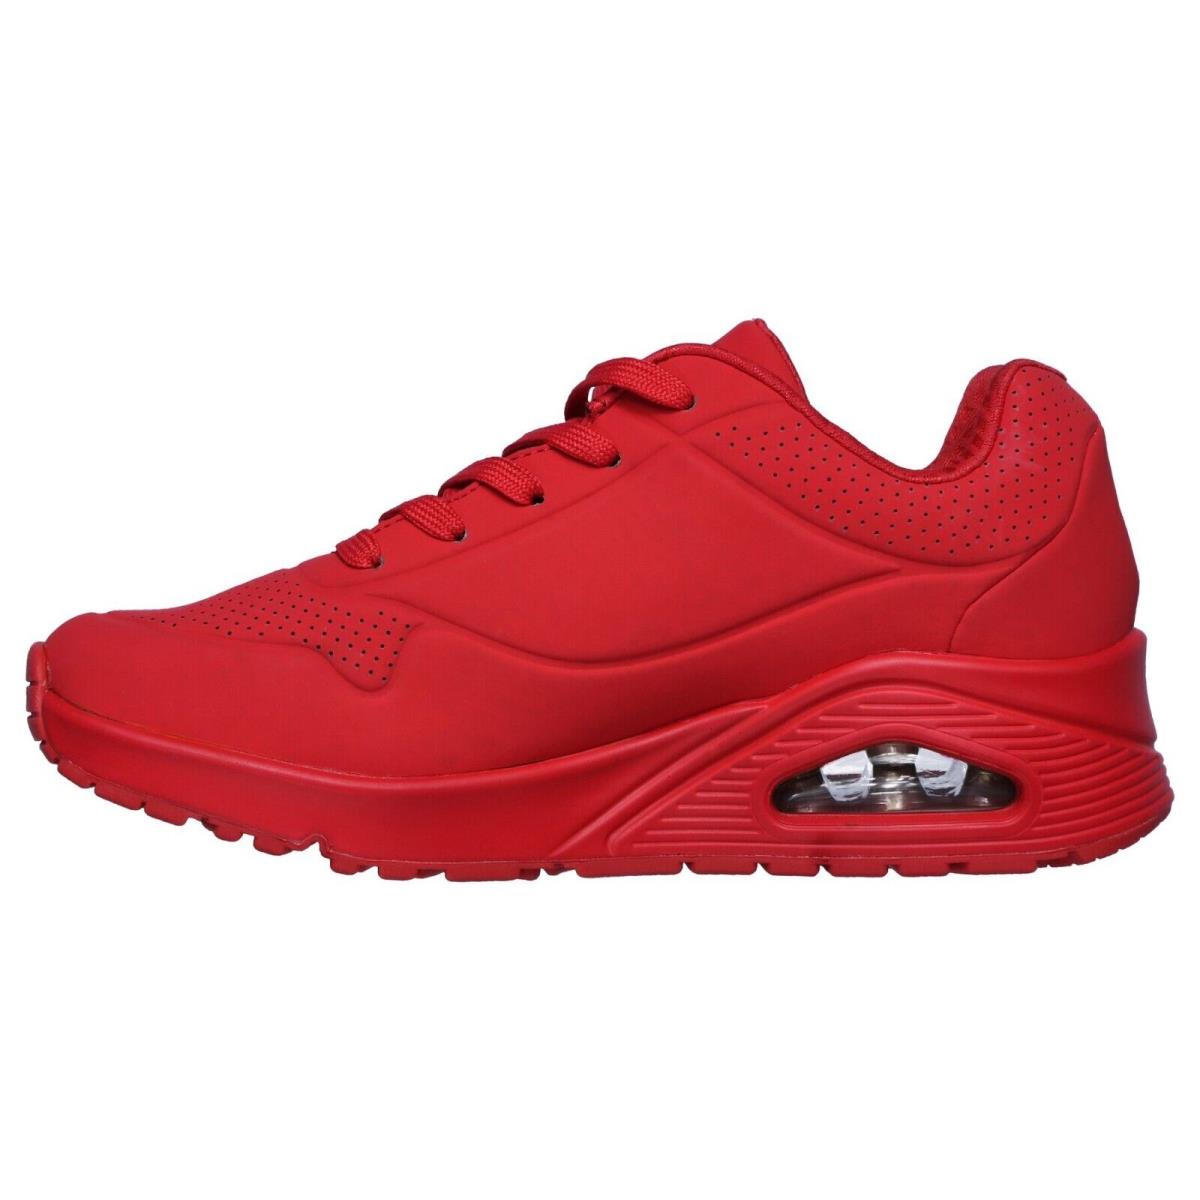 Skechers shoes  - Red 15